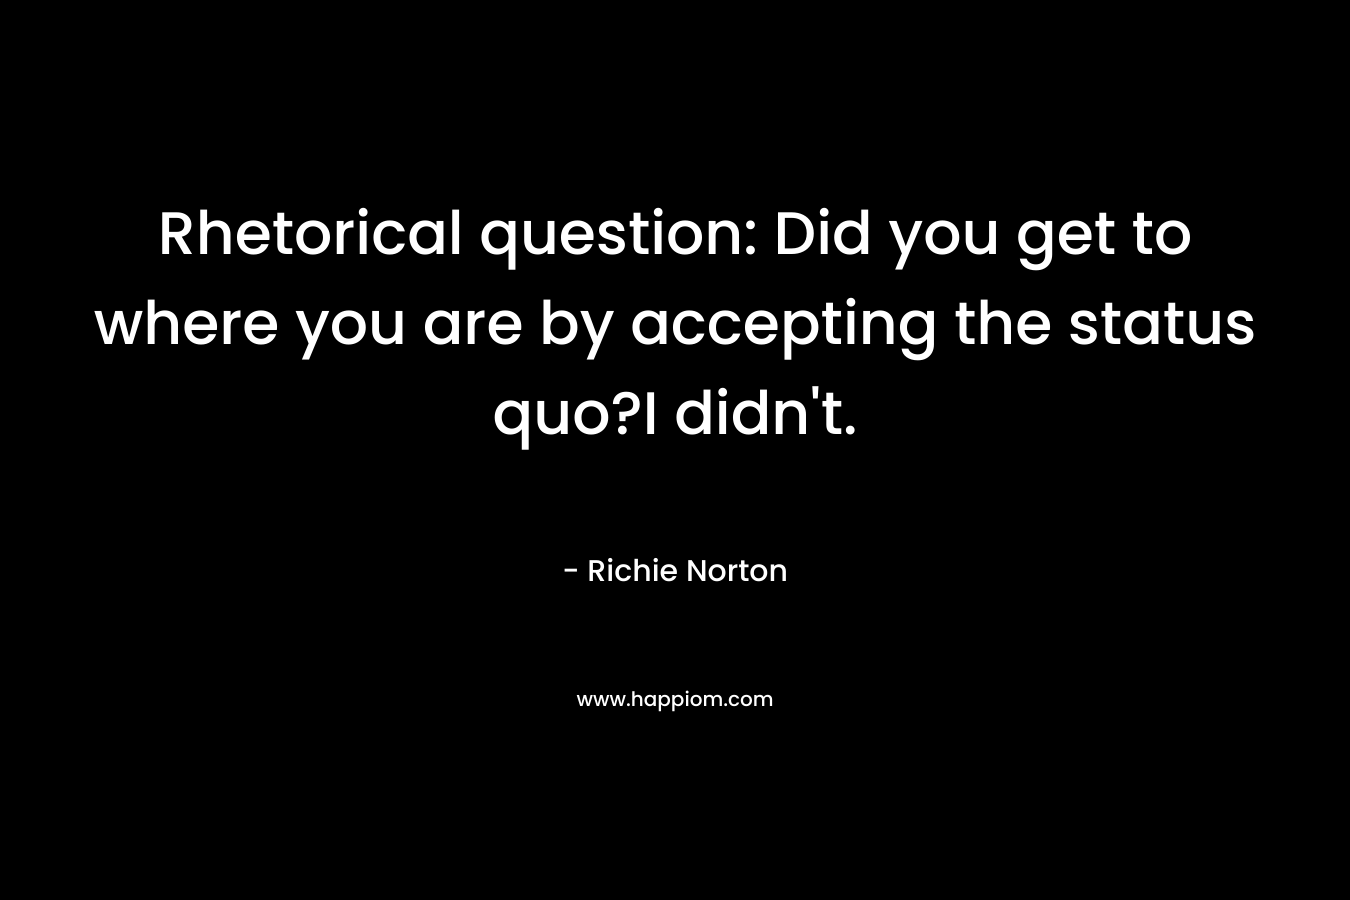 Rhetorical question: Did you get to where you are by accepting the status quo?I didn't.